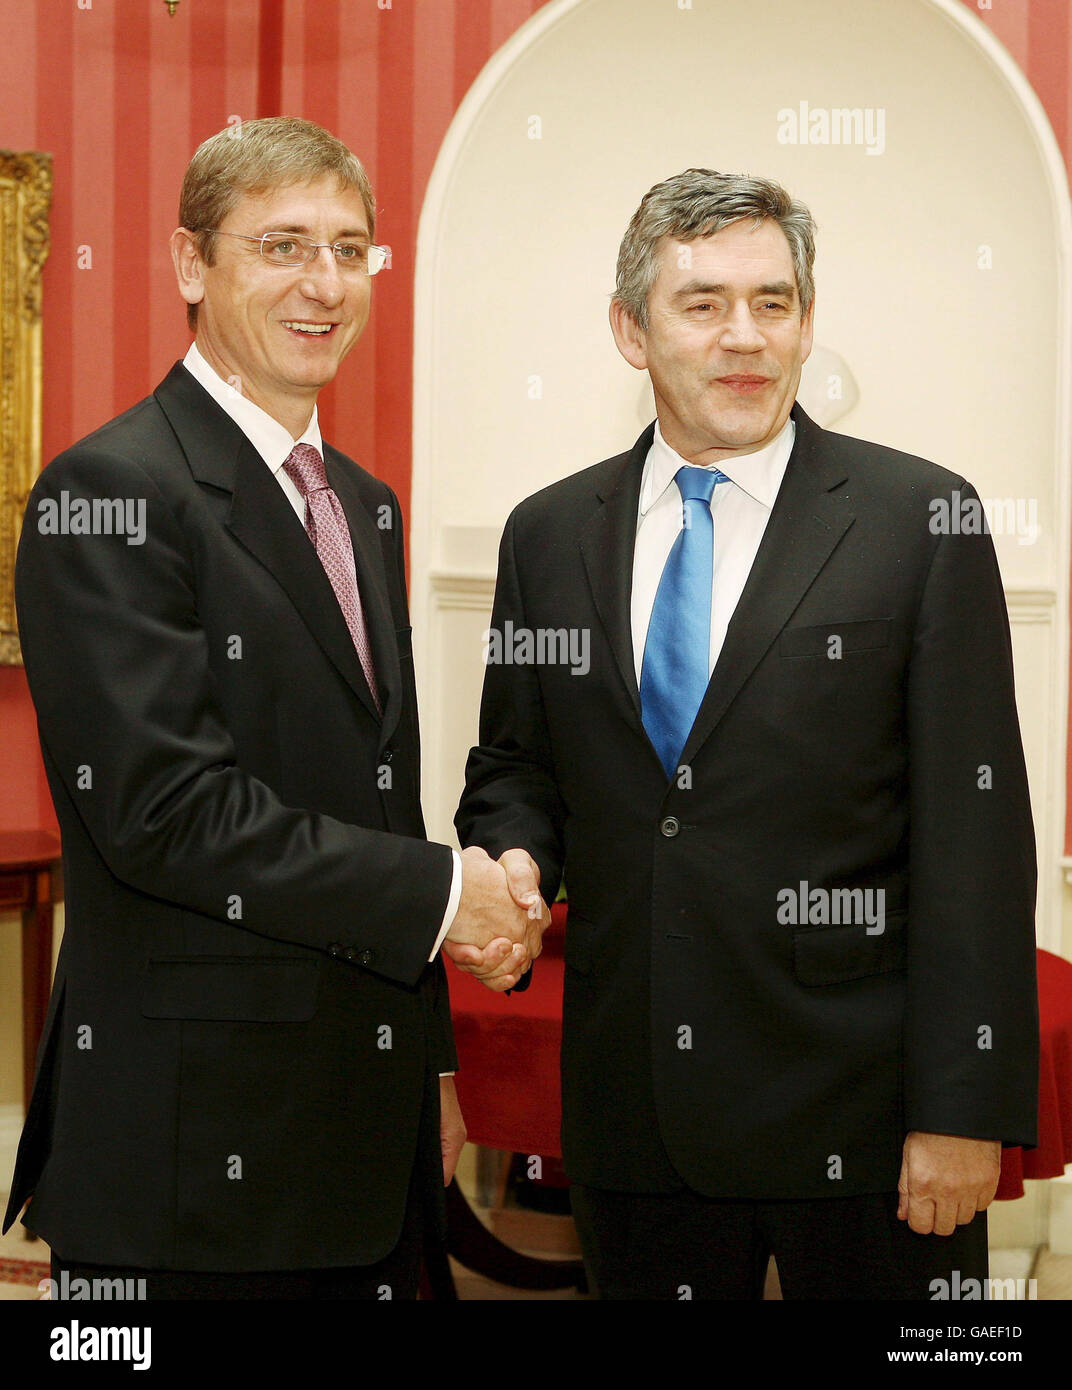 British Prime Minister Gordon Brown (right) shakes hands with Hungarian Prime Minister Ferenc Gyurcsany at Brown's London residence 10 Downing Street. Stock Photo